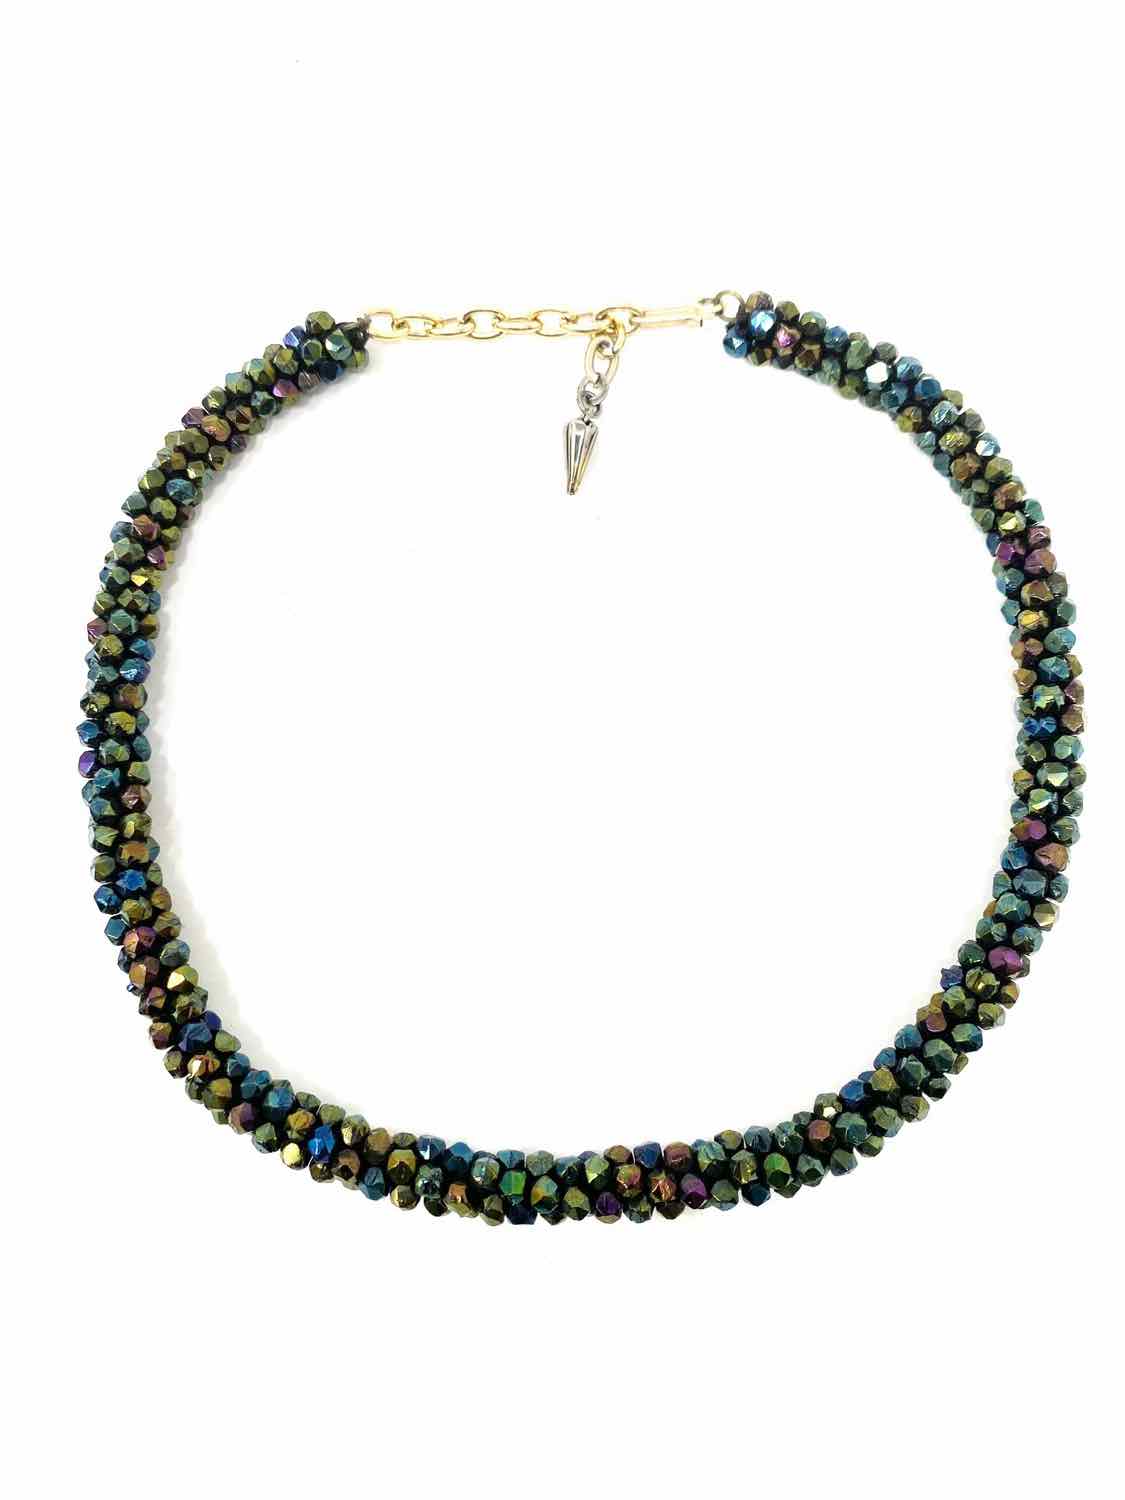 Necklace | Orisa Twist Beaded Necklace | Green and Yellow Necklace – Rush  of Ase